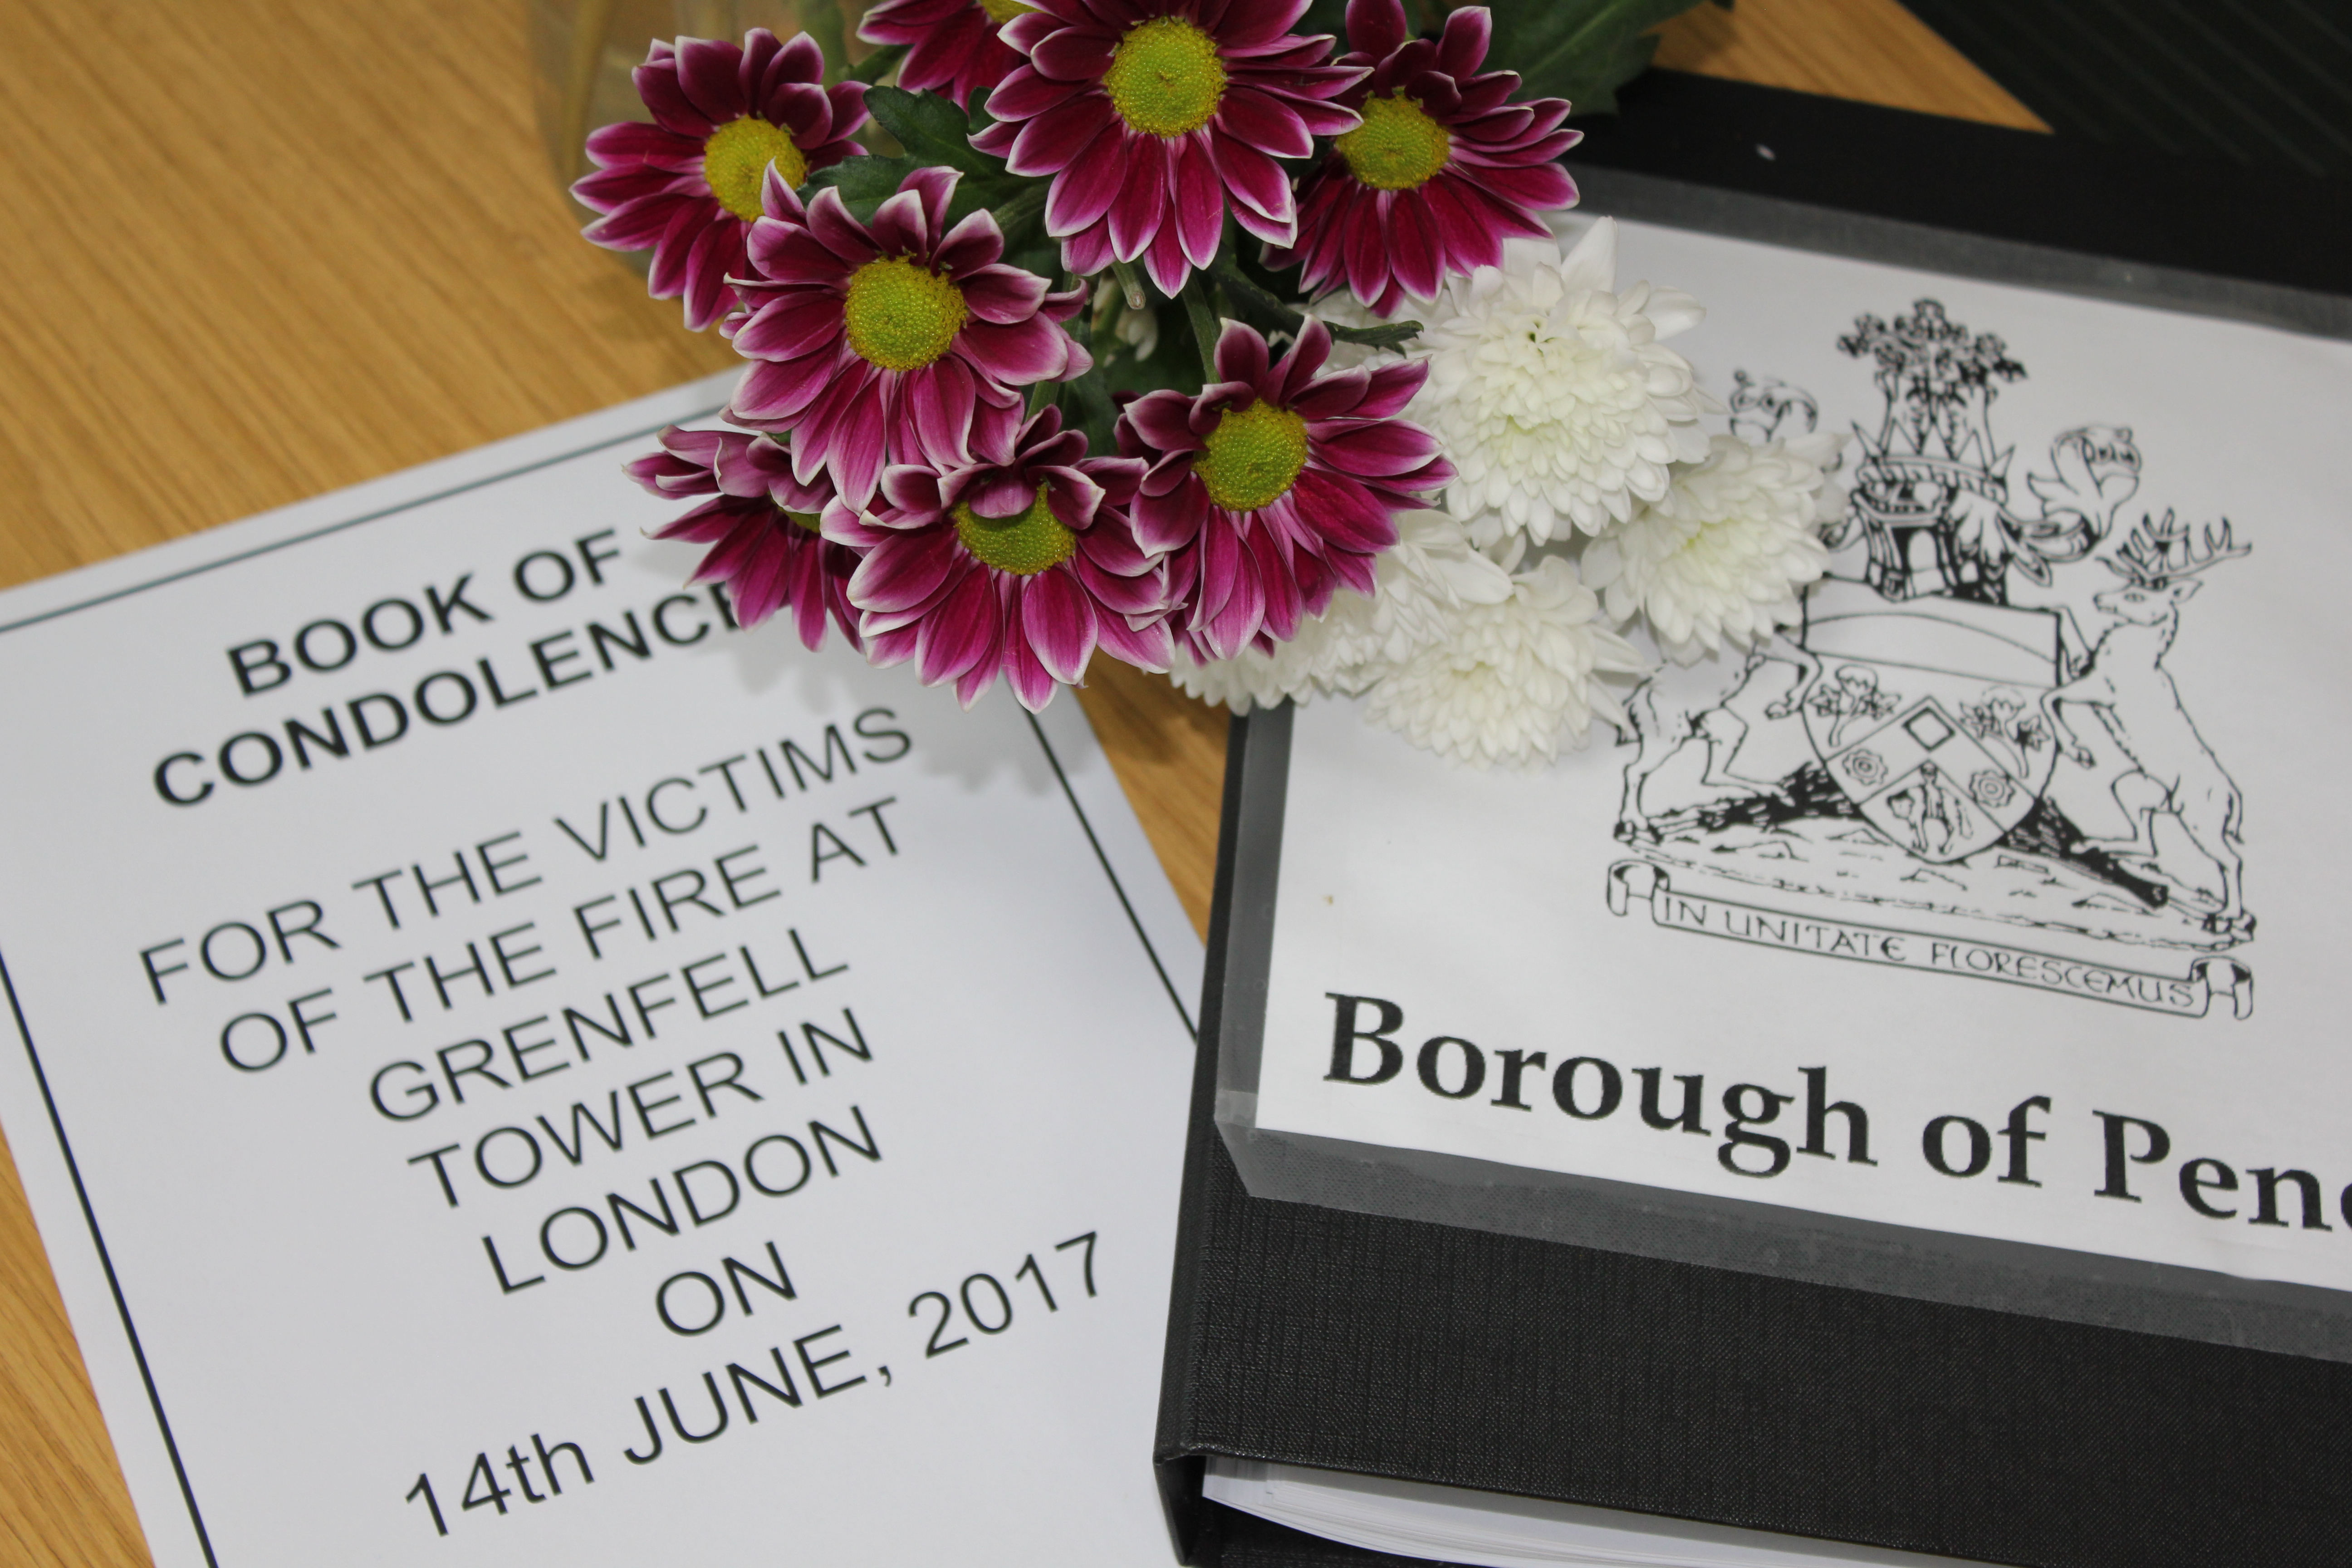 Photograph of the condolences book at Nelson Town Hall for the victims of the Grenfell Tower fire, London.